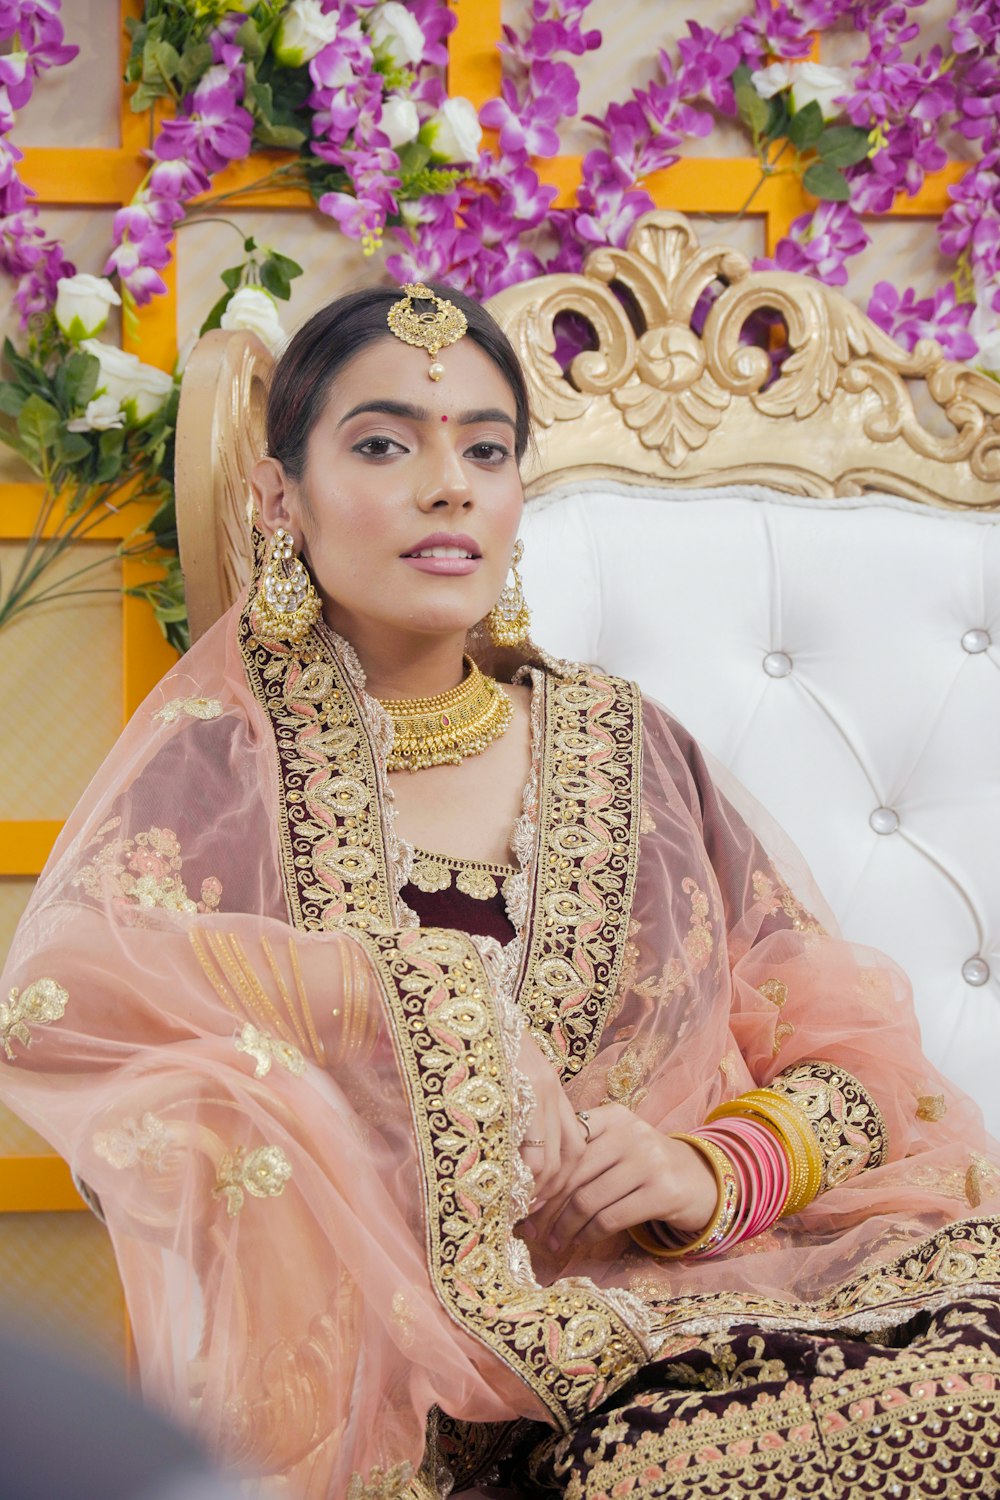 a woman in a bridal outfit sitting on a couch